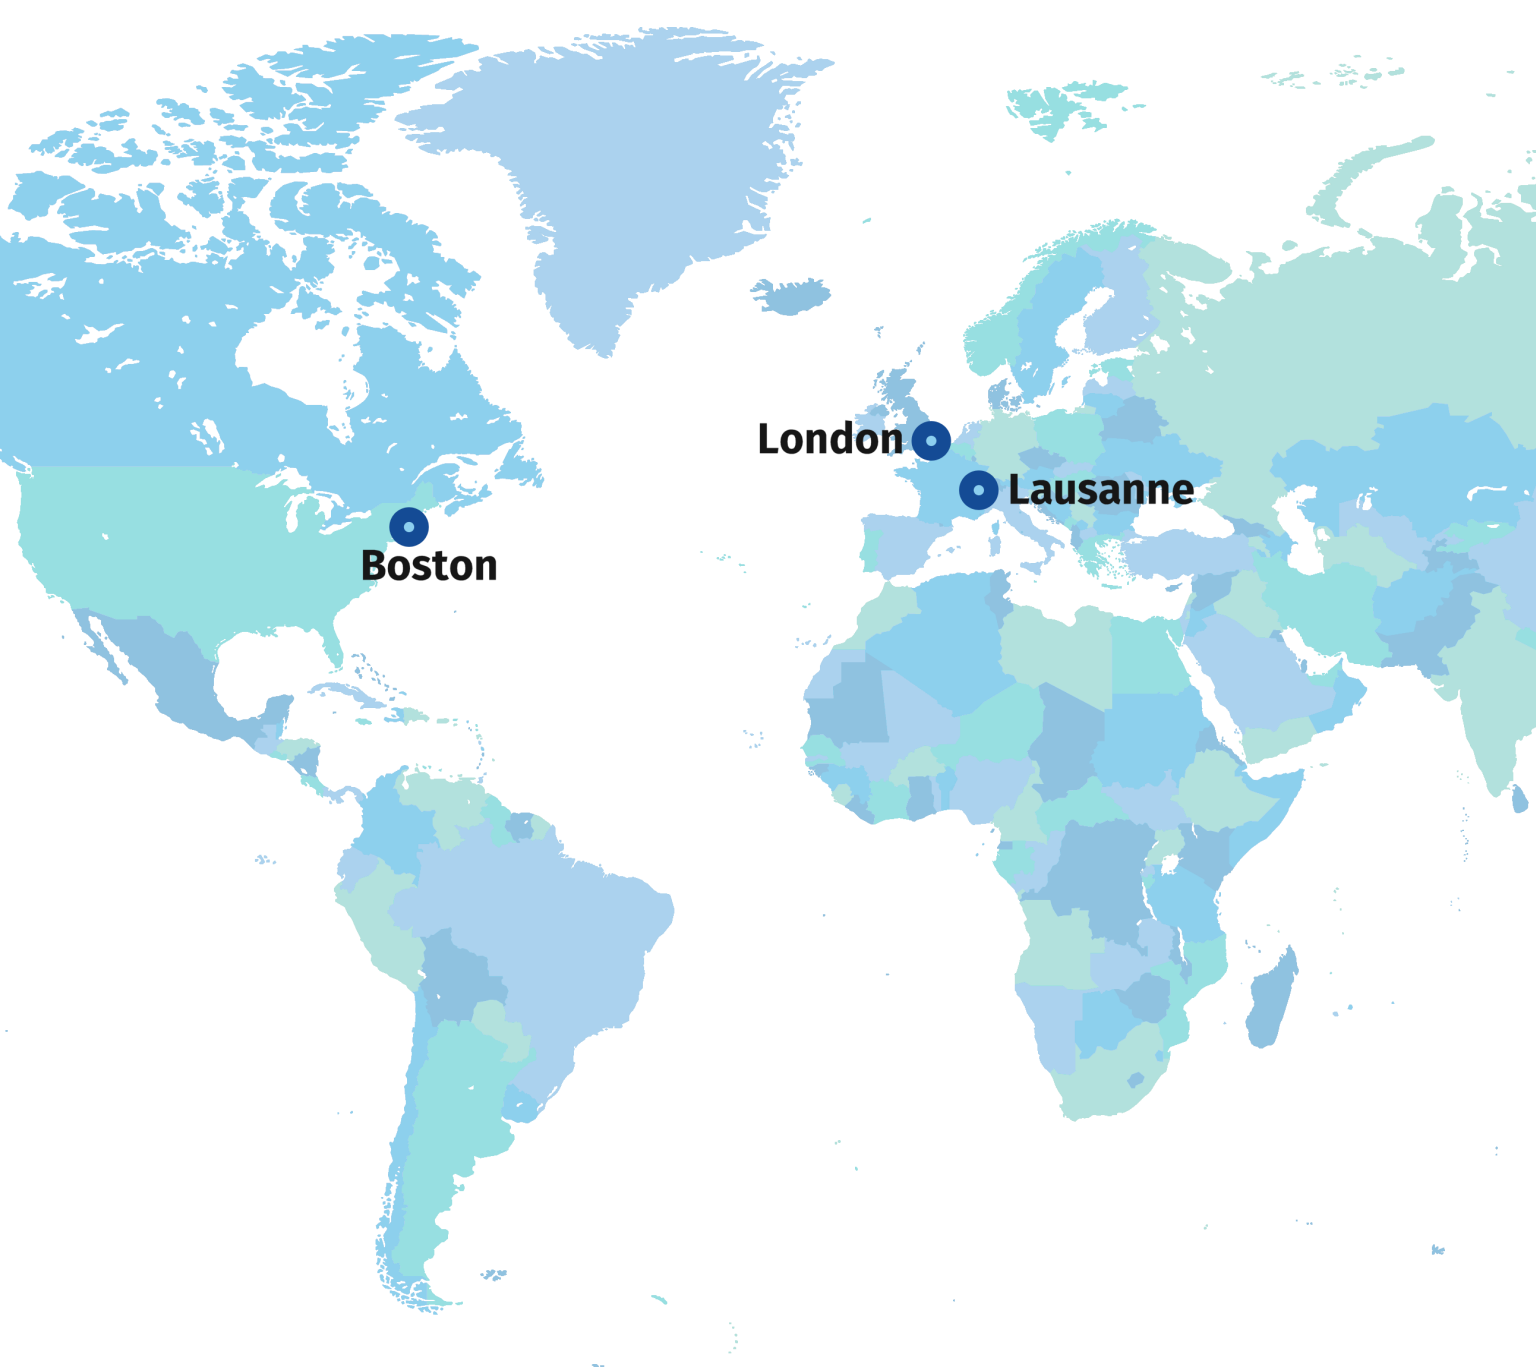 Cropped world map showing the locations of Boston, London and Lausanne